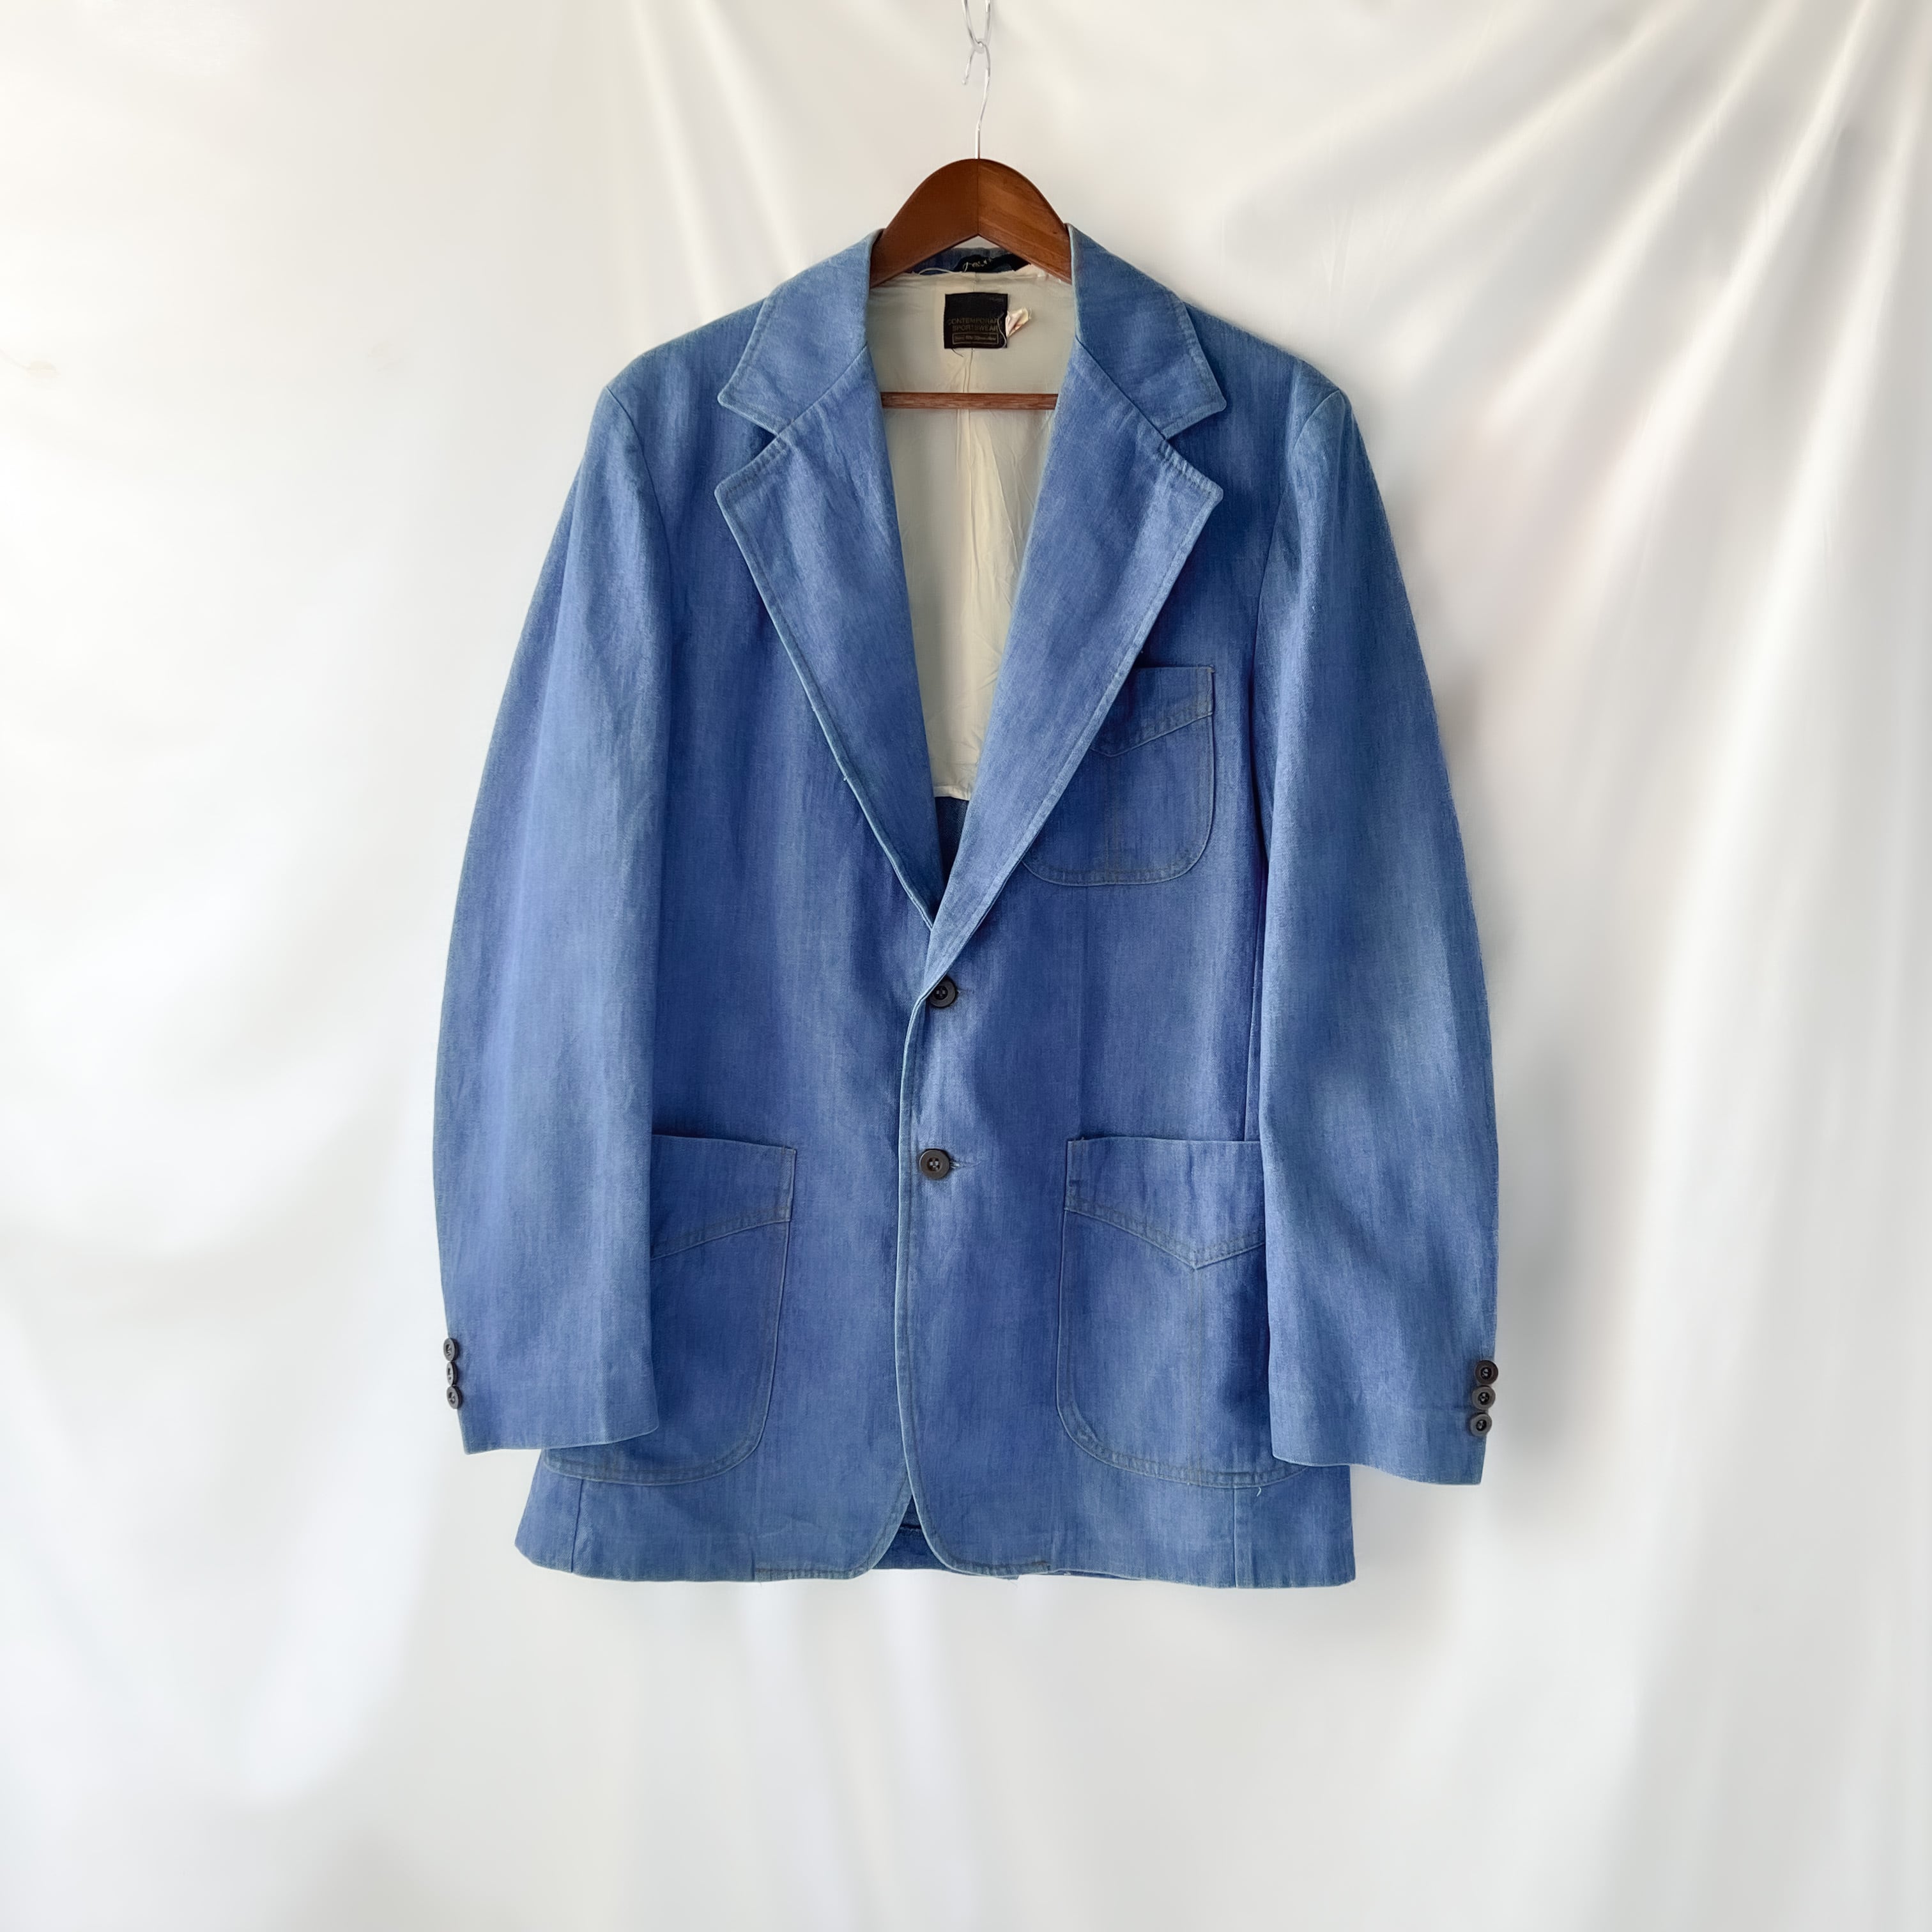 About 70s “Sears” 黒タグ 金色刺繍 Chambray tailored jacket 60年代